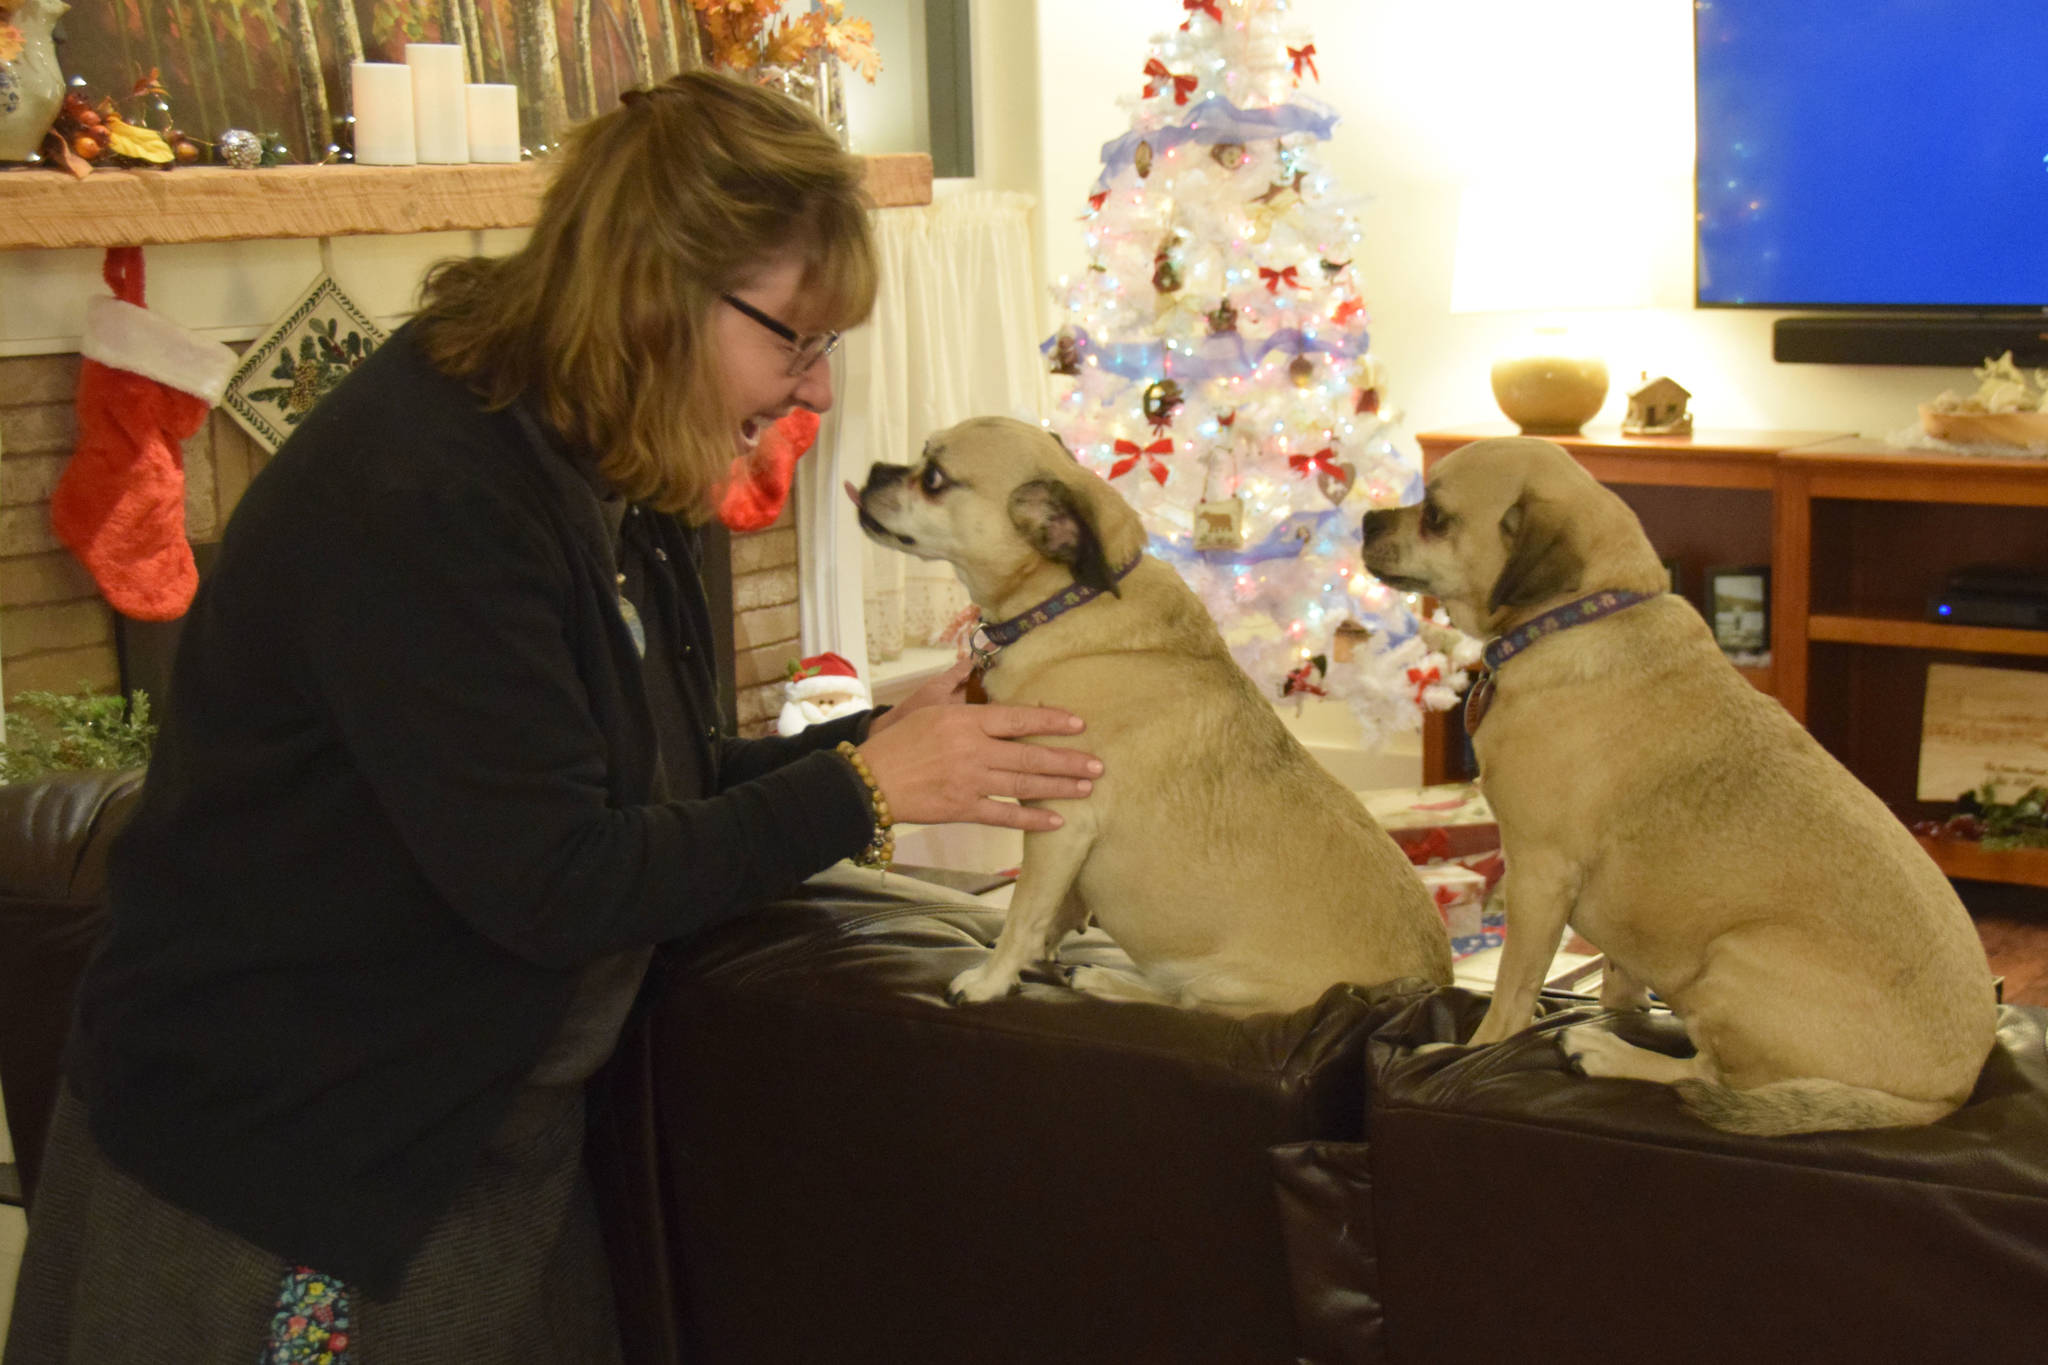 Sandy Kearns and two of her animal companions, Daisy and Lily, featured on Feb. 20, 2019 at Winter’s Grace Guidance Center in Soldotna. (Photo by Brian Mazurek/Peninsula Clarion)